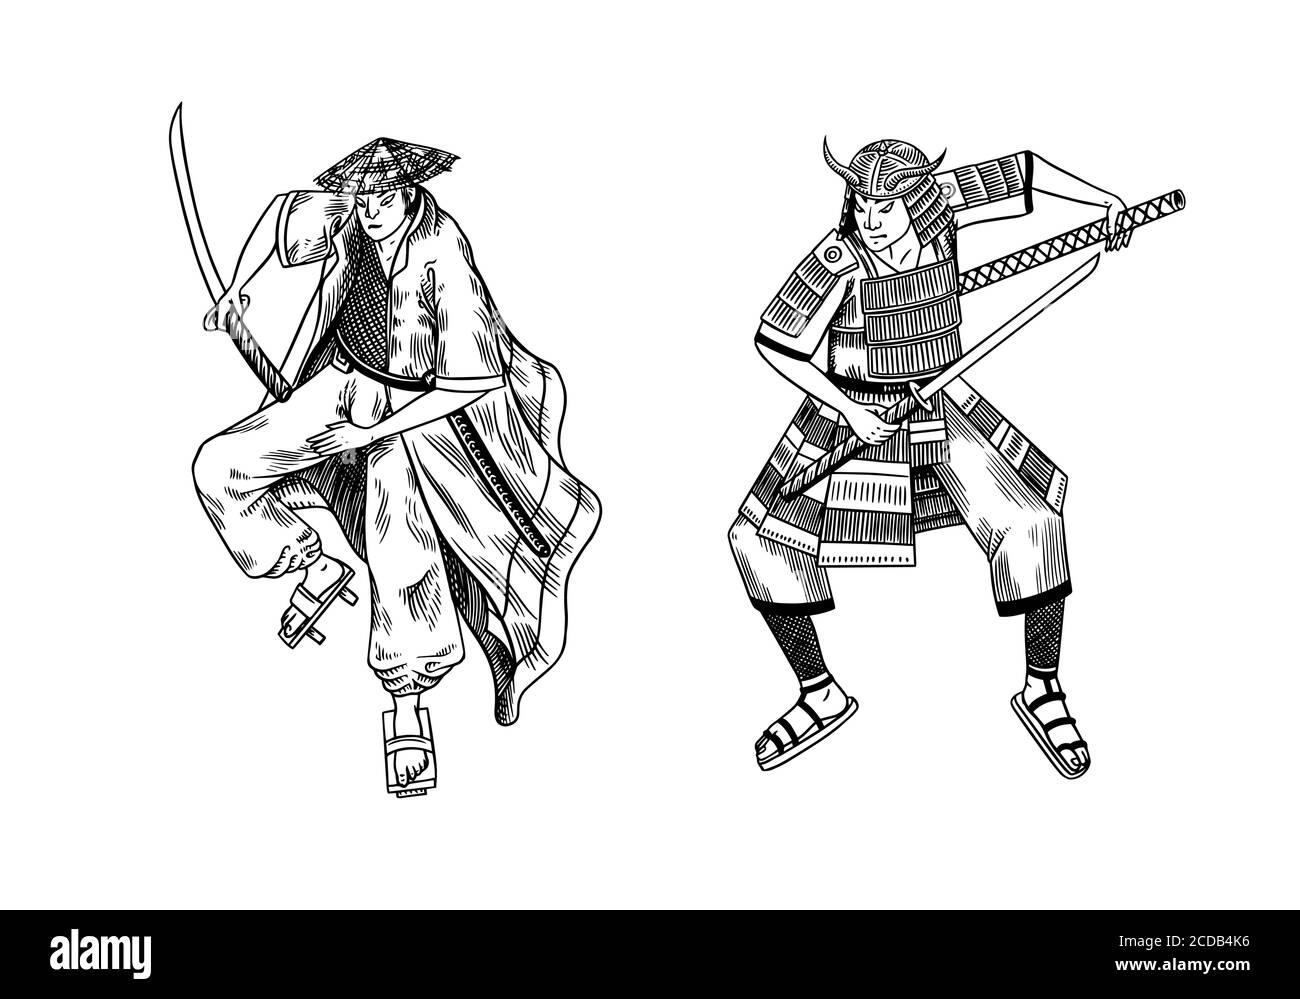 Japanese samurai warriors with weapons sketch. Men in a fight pose. Hand drawn vintage sketches. Vector illustration in monochrome style. Stock Vector